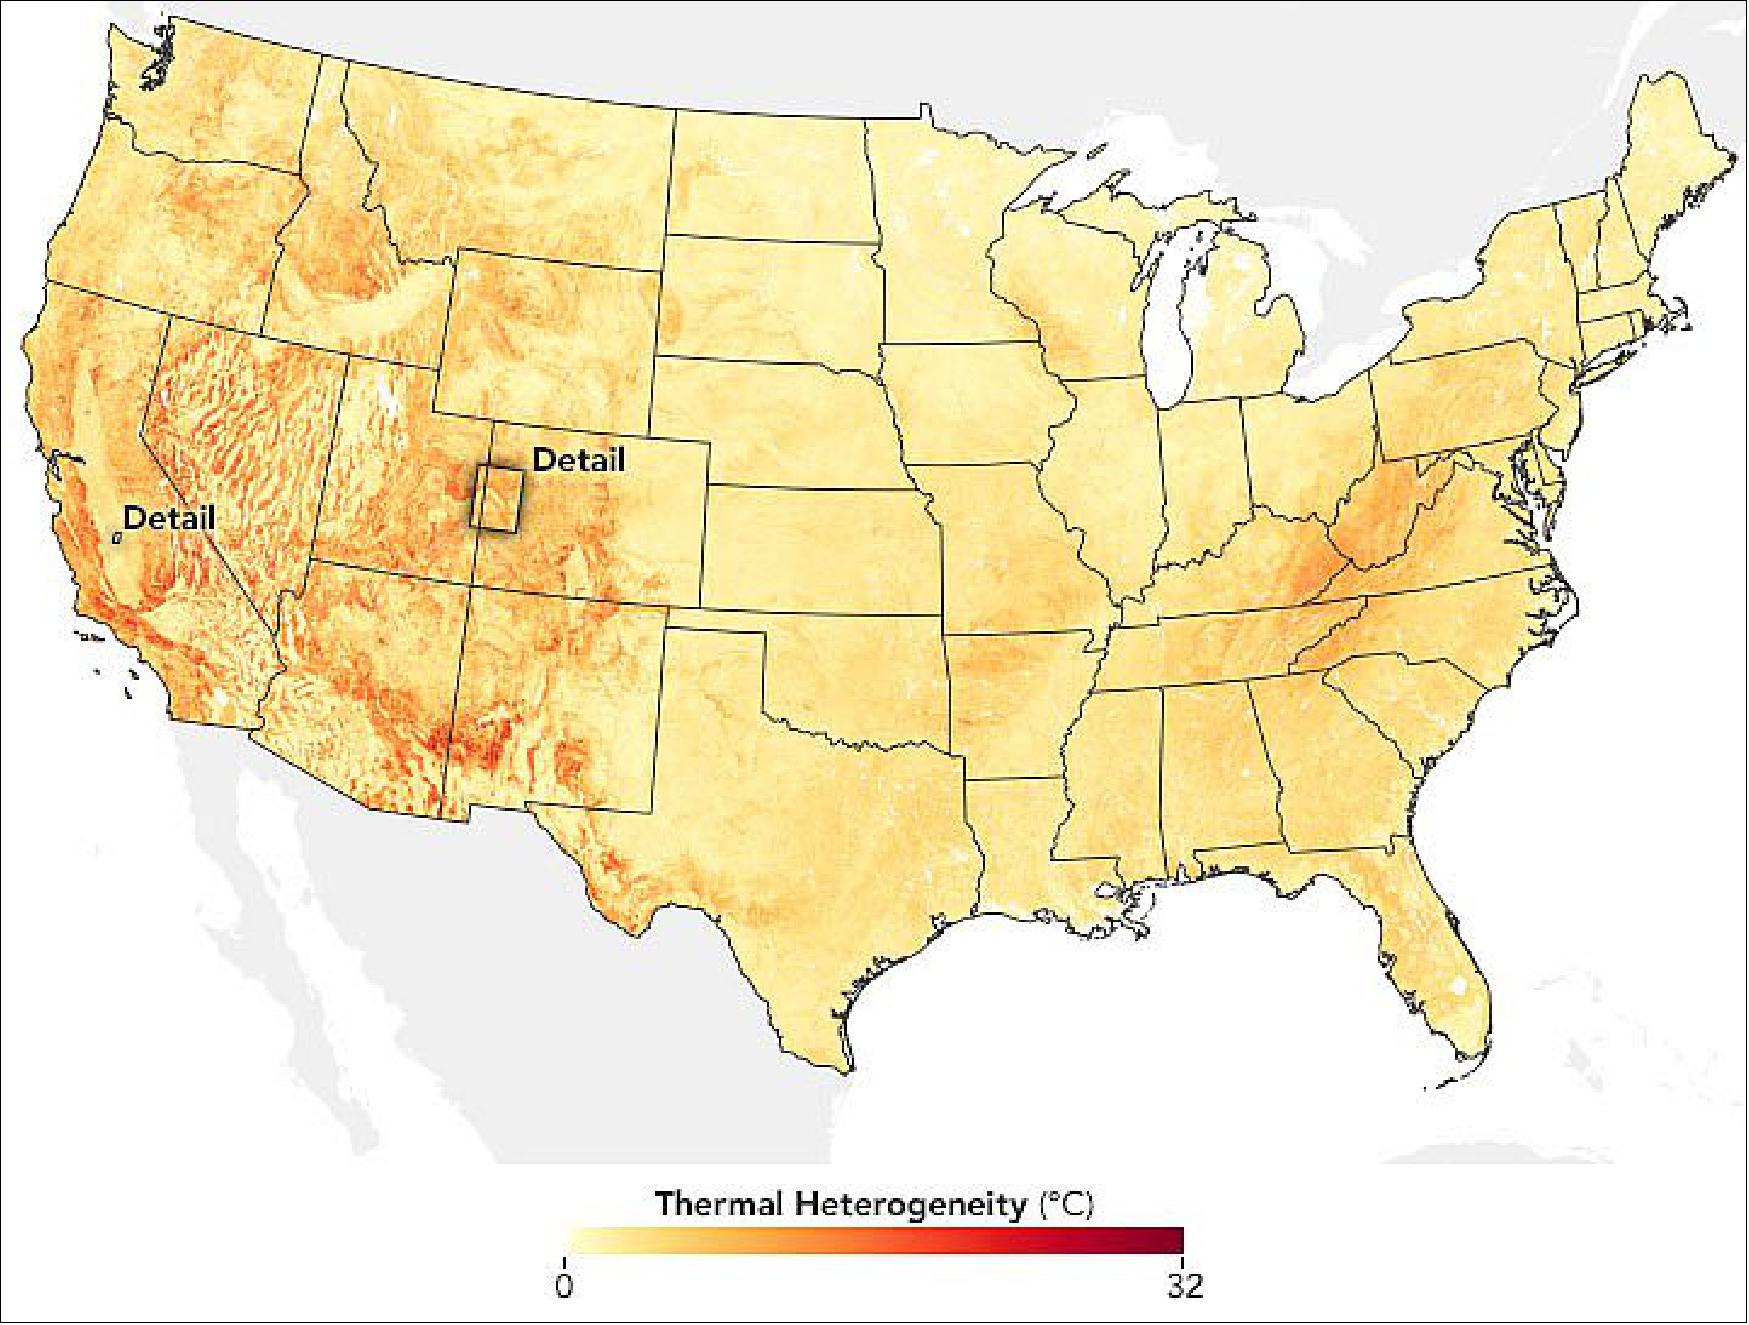 Figure 80: This map, also derived from TIRS data, shows the magnitude of these temperature differences, or “thermal heterogeneity”—that is, how much temperatures differ across small distances in the landscape. Higher values (red) indicate a greater temperature difference and lower values (yellow) indicate temperatures that are relatively similar. The map shows that the largest differences tend to occur around mountains. Again, the pattern is intuitive: when you are hiking a mountain, the temperature can change drastically as you gain or lose elevation (image credit: NASA Earth Observatory)